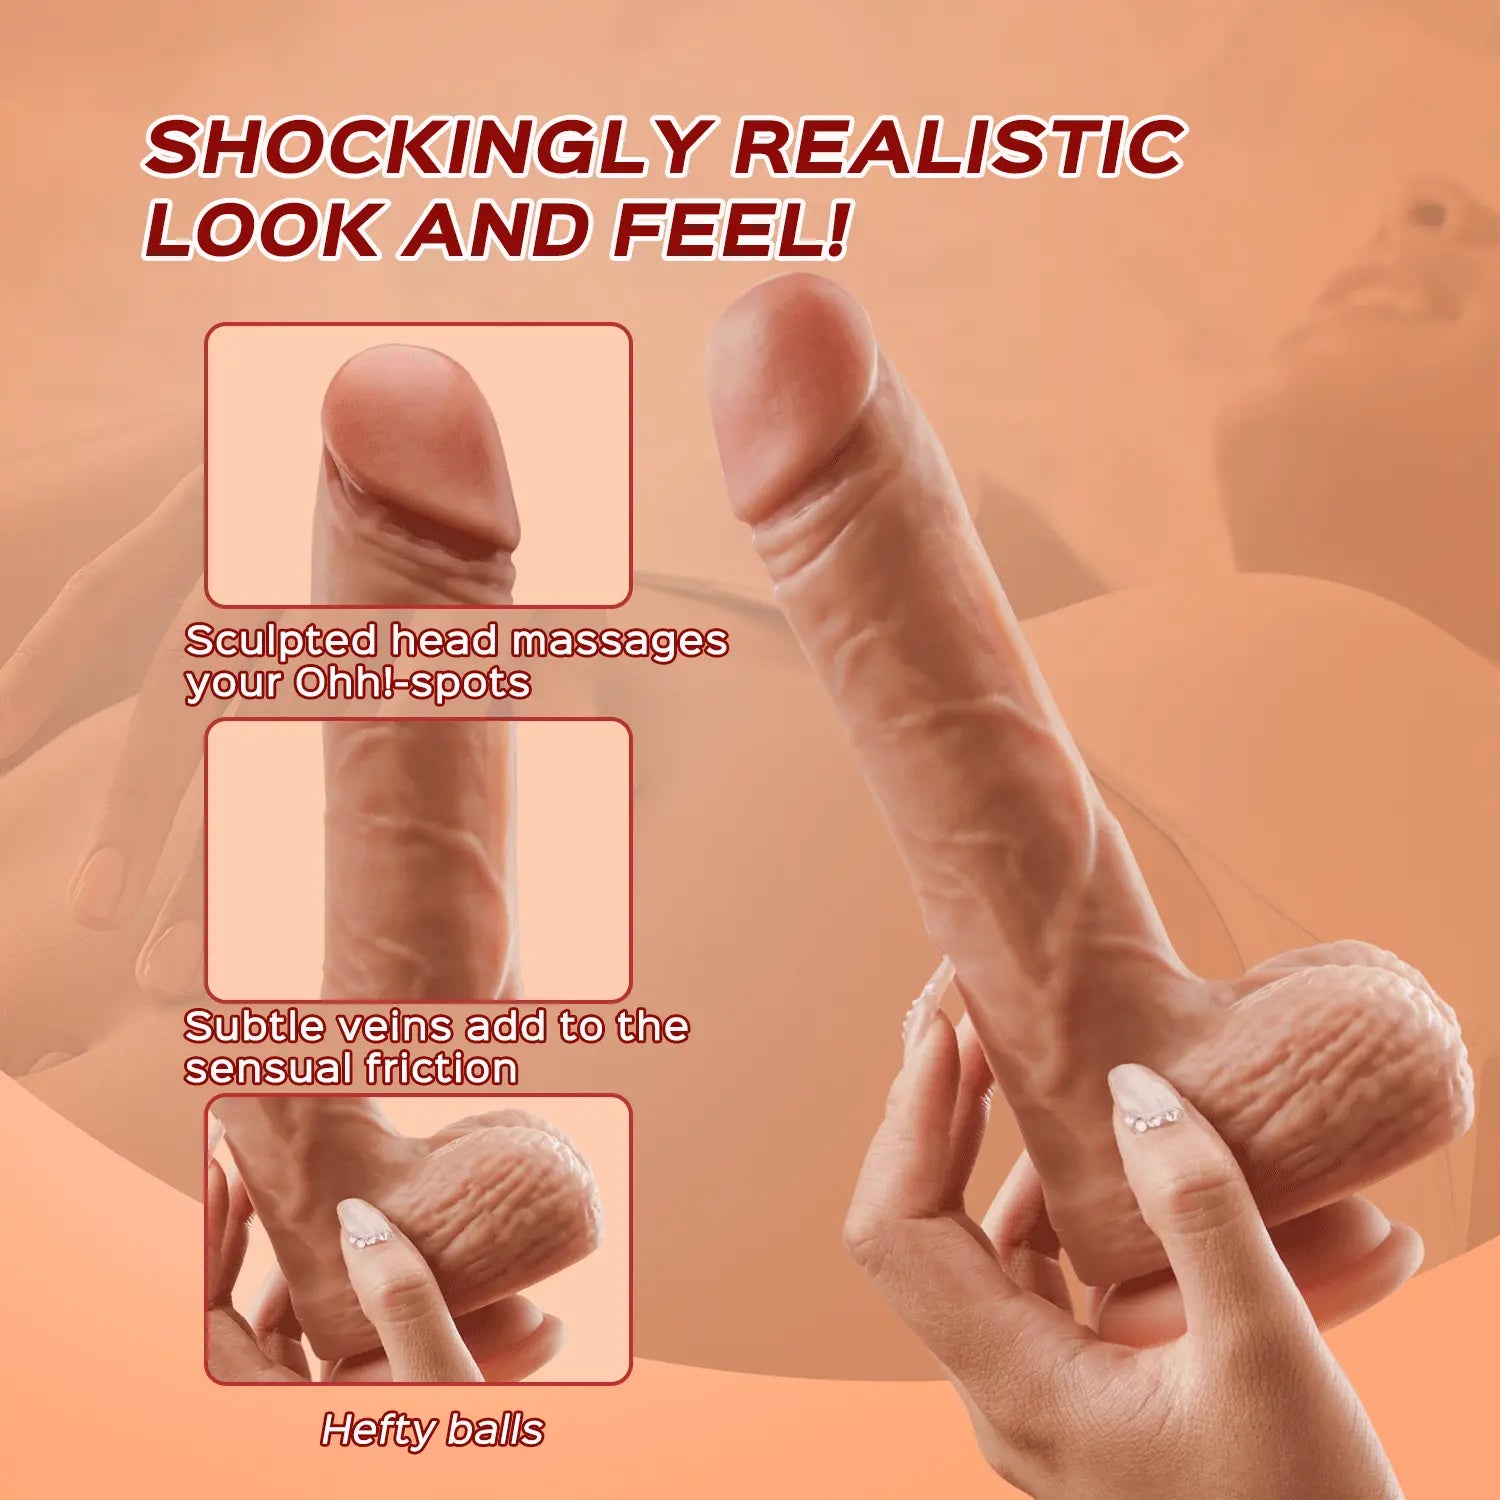 Tanner - Vibrating & Tapping Realistic Suction Cup Dildo with Remote Control